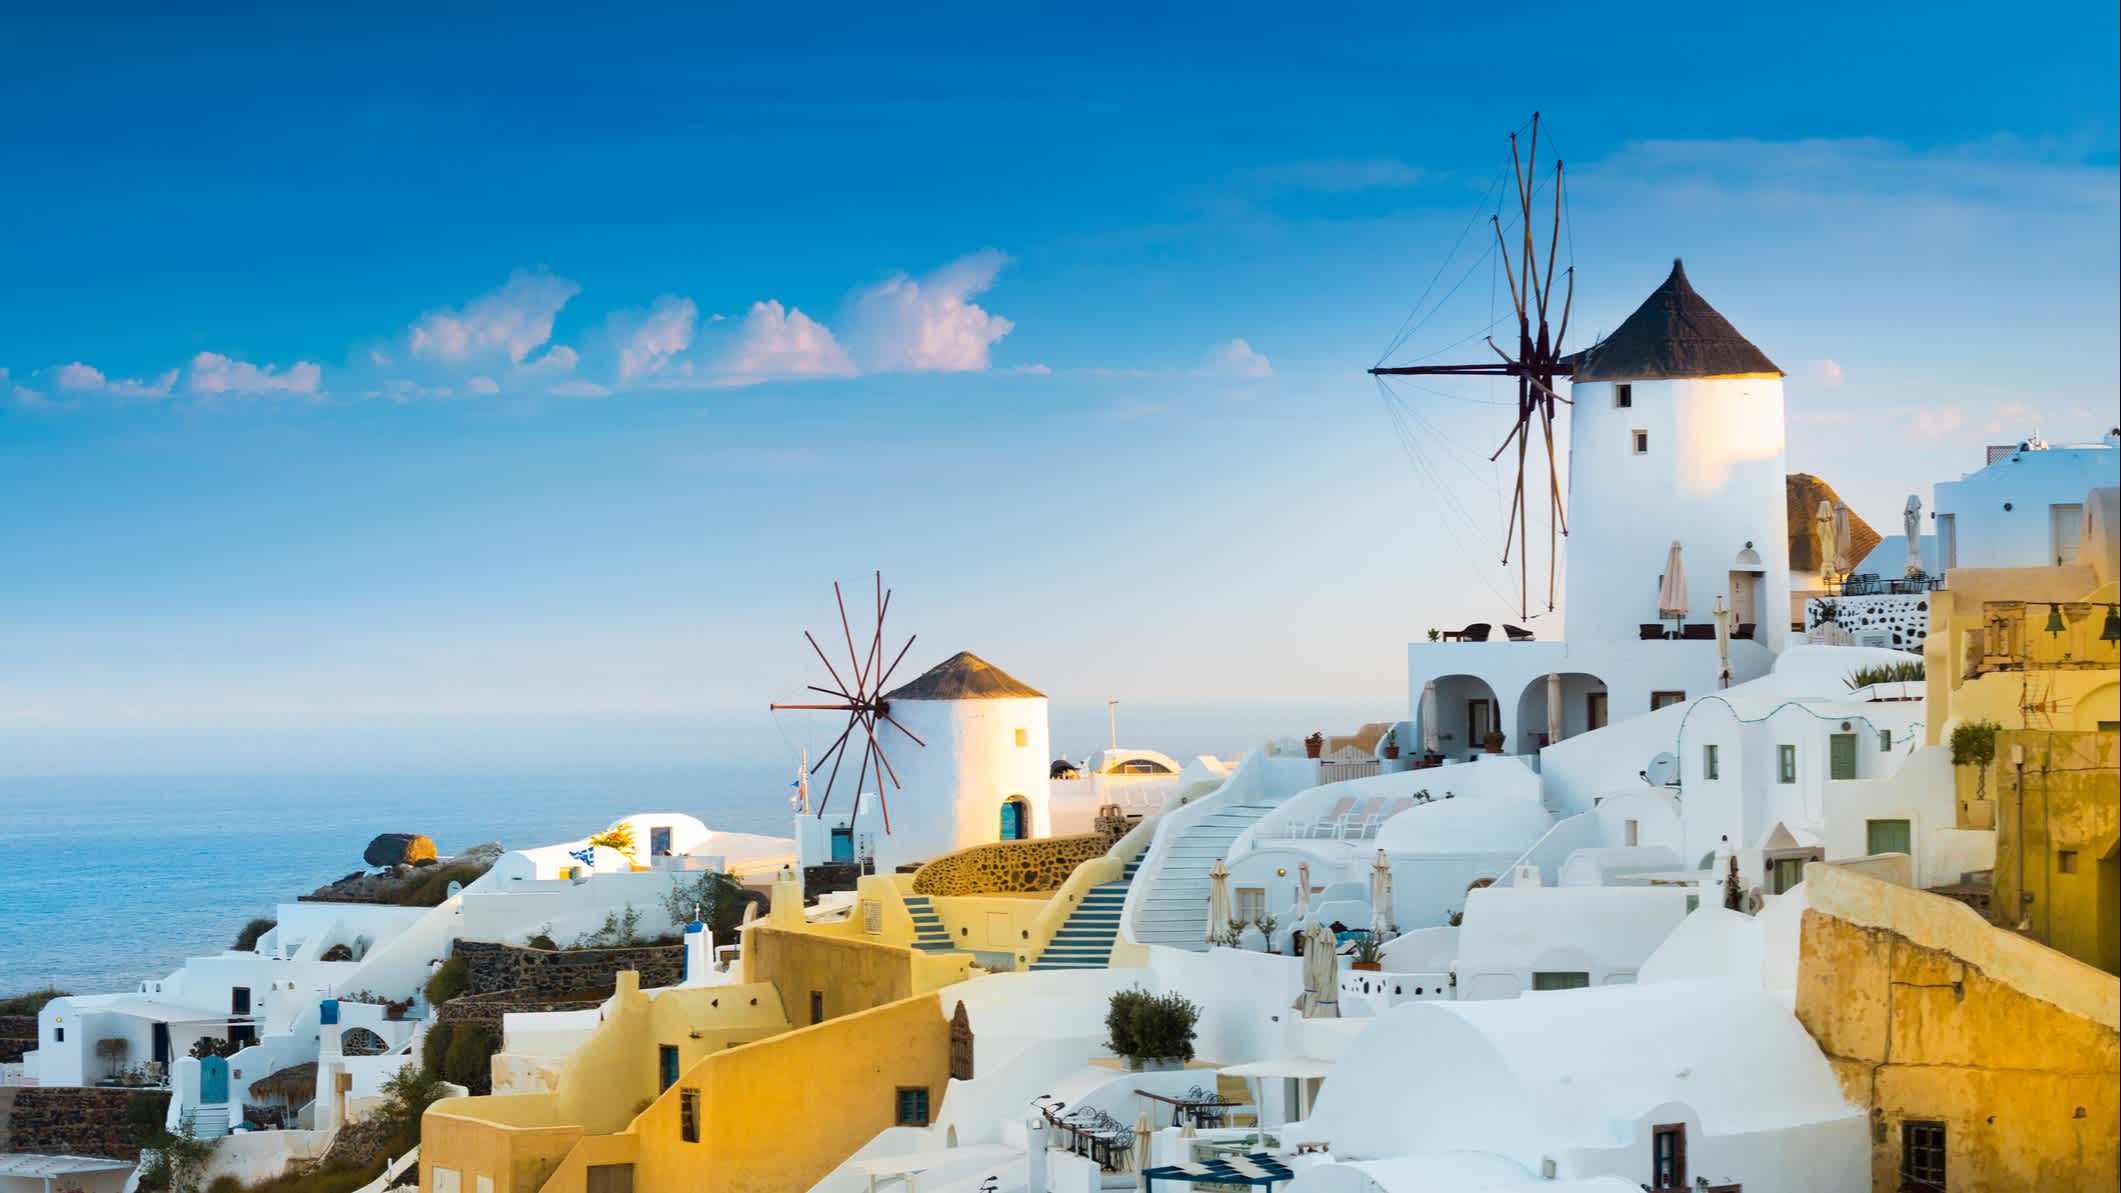 View of Oia the most beautiful village of Santorini island in Greece